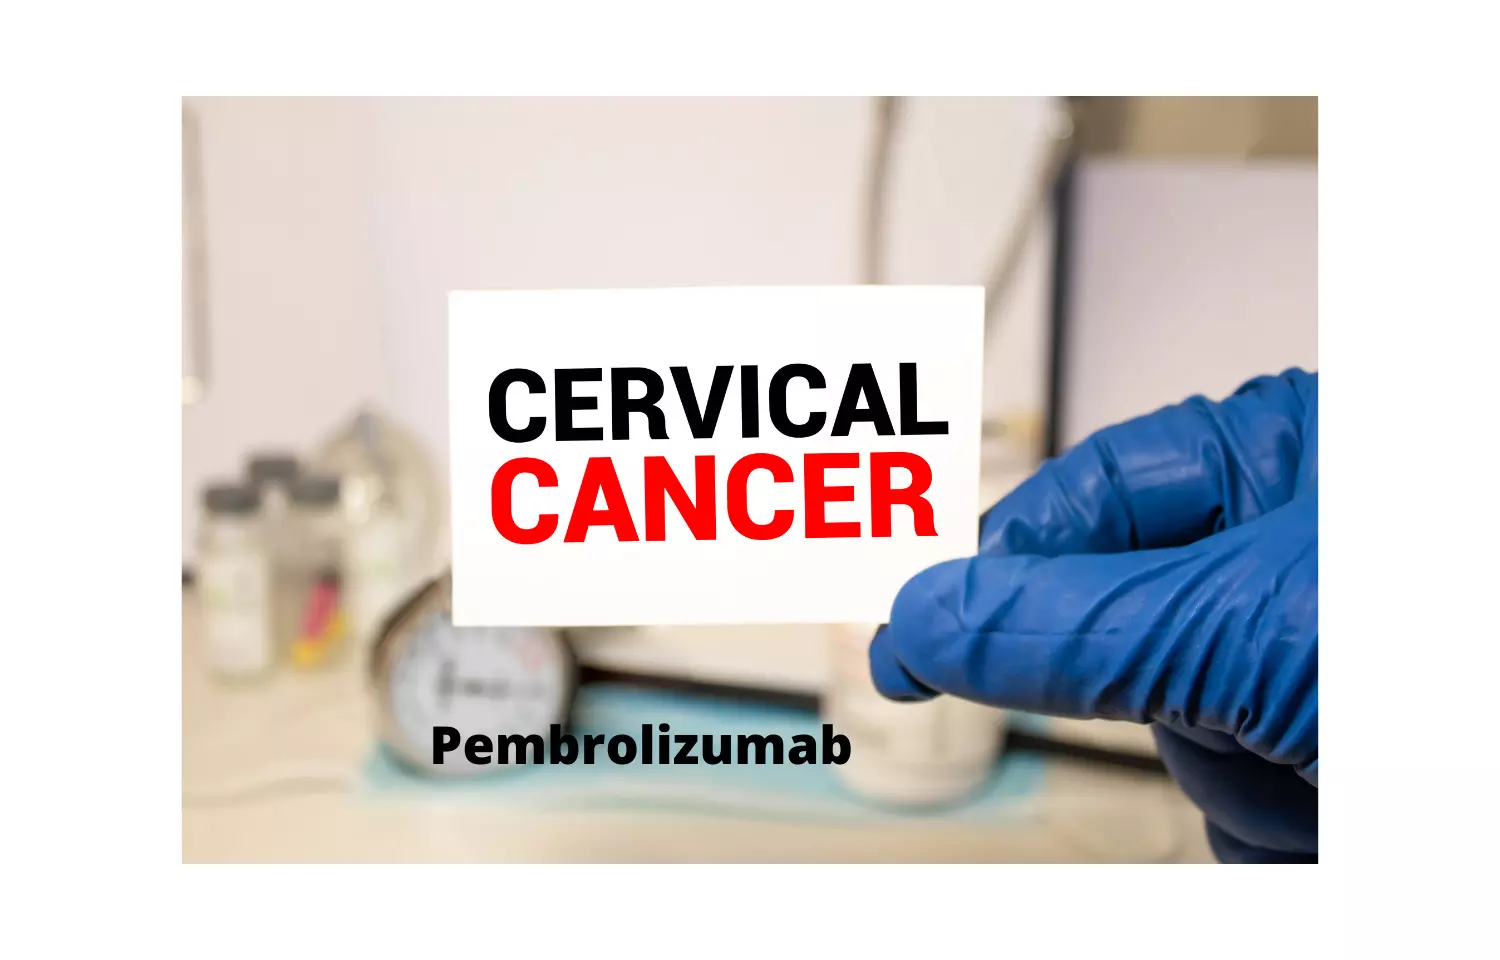 Pembrolizumab increases survival of patients with unresectable cervical cancer on chemotherapy: NEJM